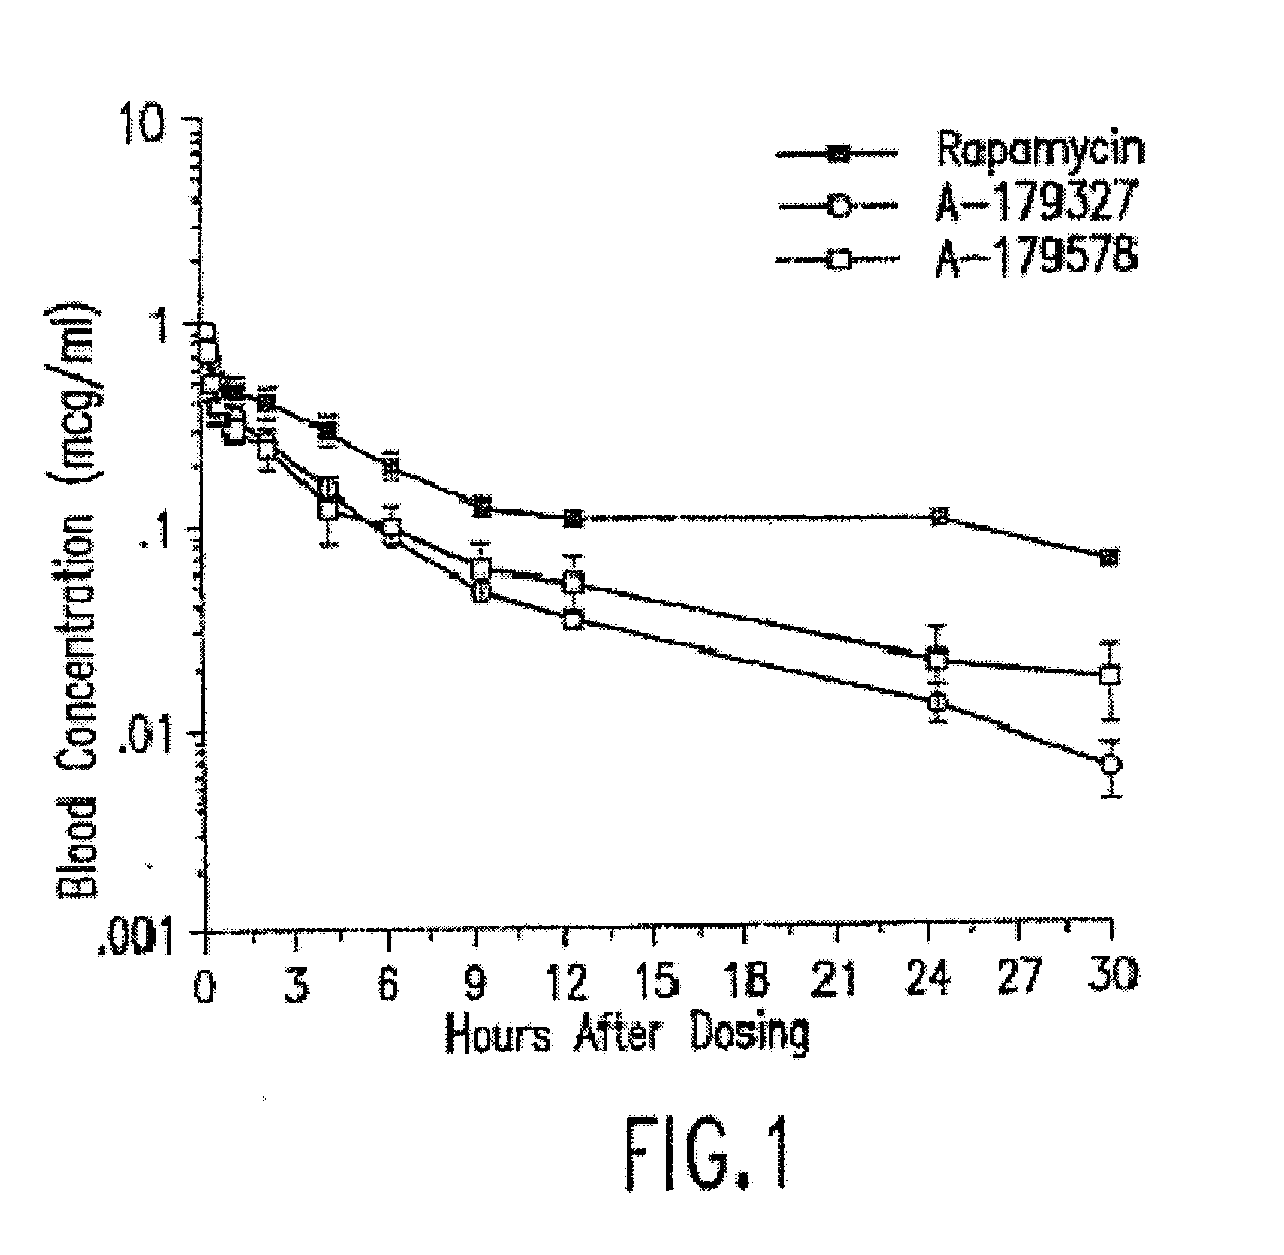 Compositions and methods of administering paclitaxel with other drugs using medical devices